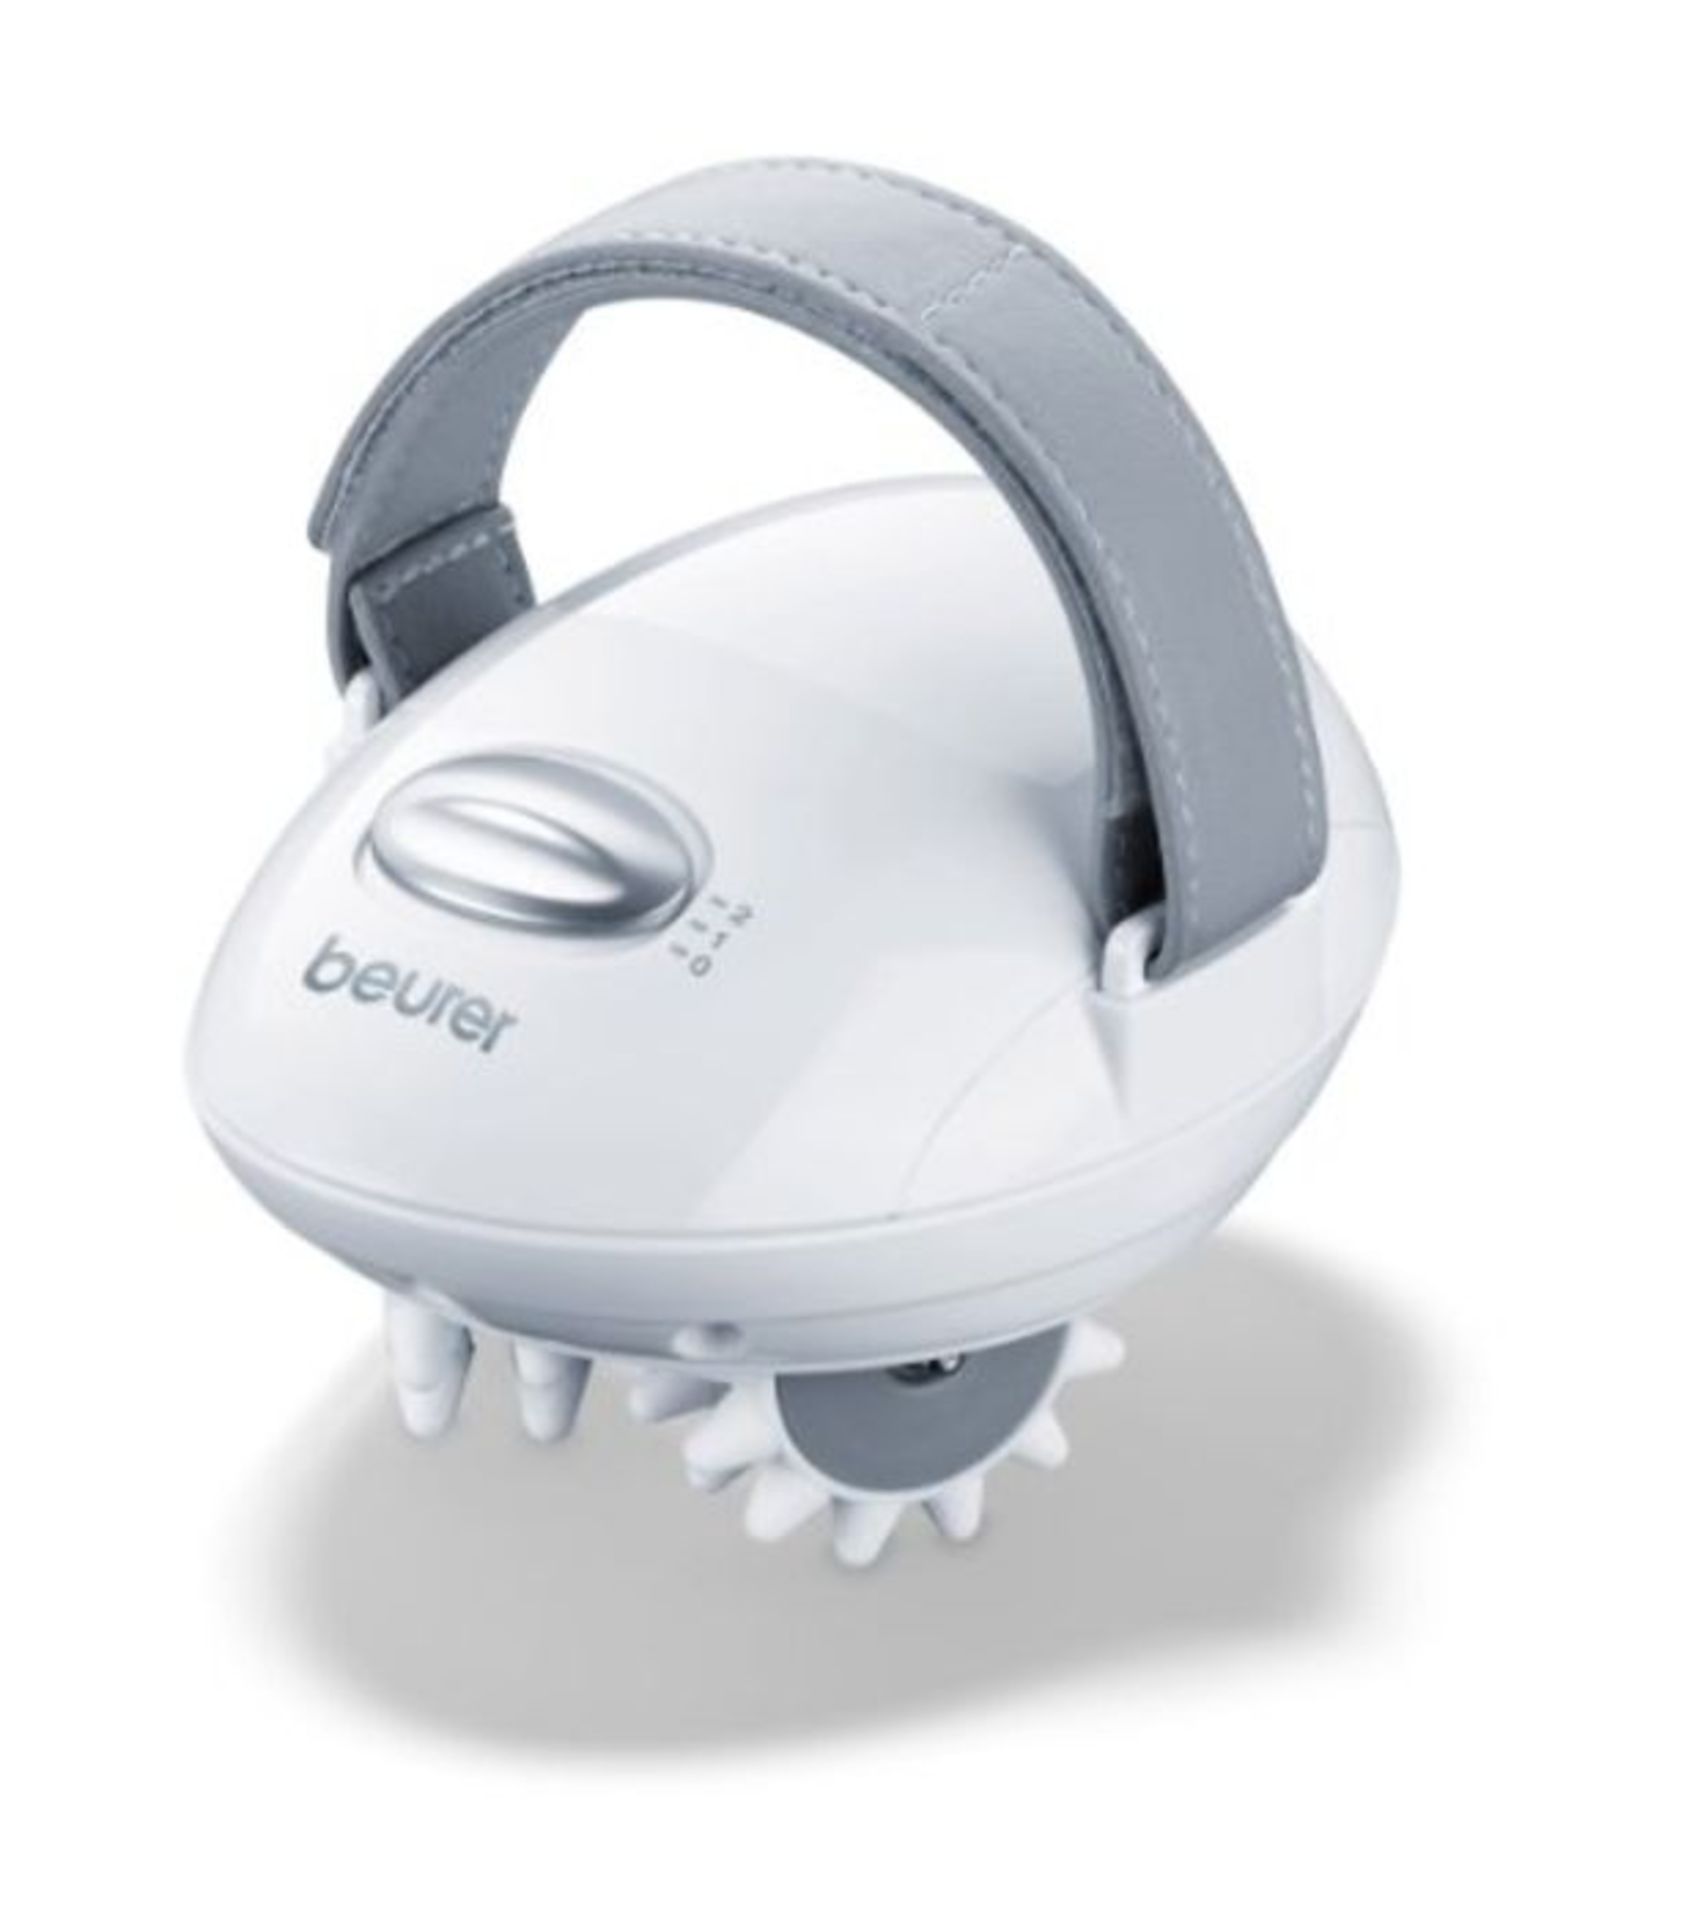 RRP £60.00 Beurer CM50 Cellulite Massager, Roller and Vibration Massager to Boost Circulation, Co